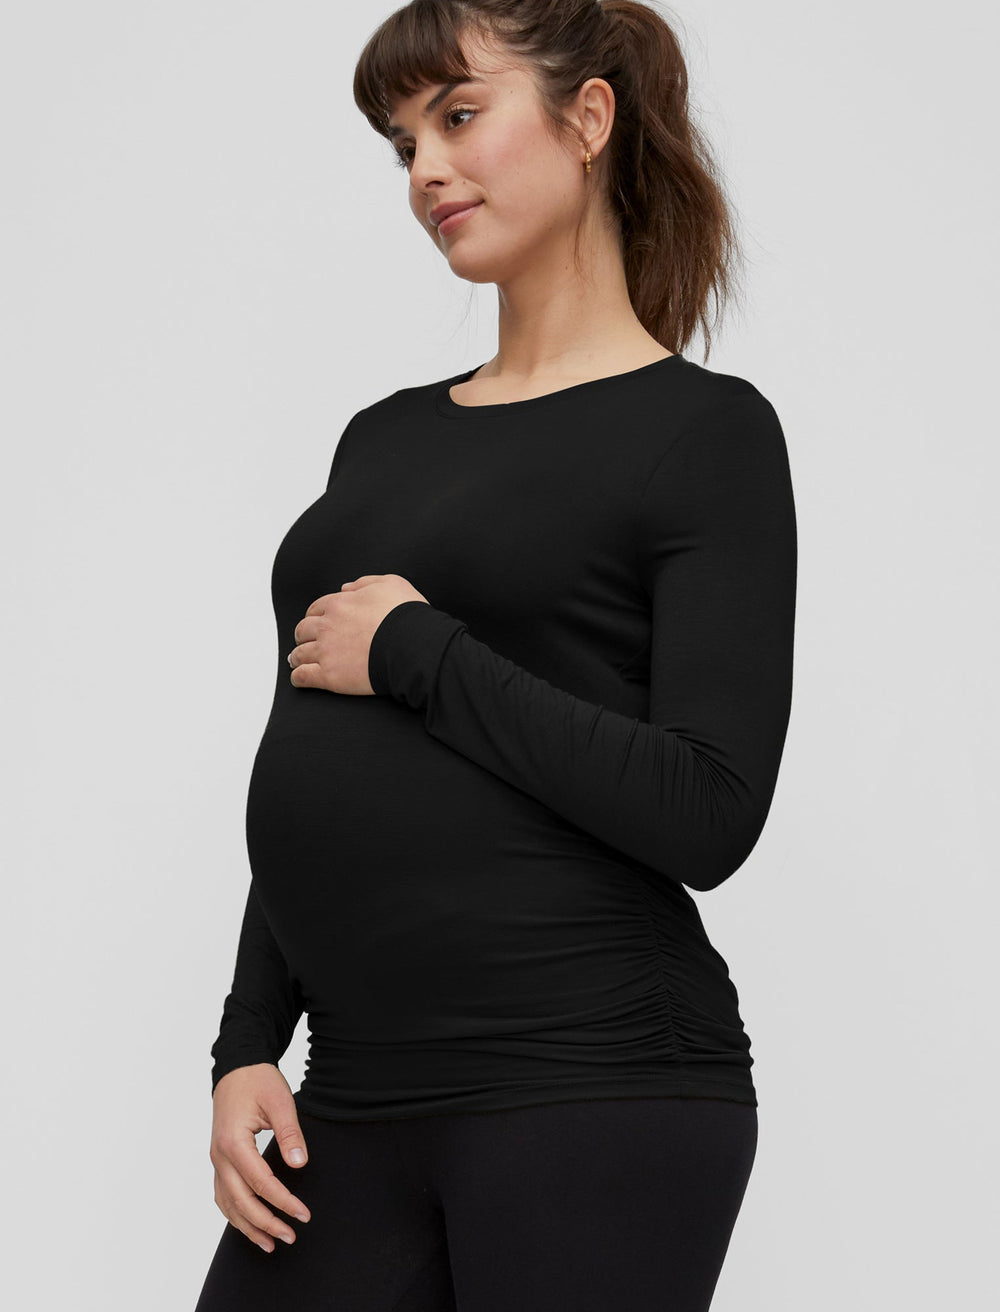 GINKANA Maternity Shirts Long Sleeve Velvet Maternity Tops Ruch Sides  Pregnancy Bodycon T-Shirt Tunic Blouses Maternity Clothes,Black,S at   Women's Clothing store